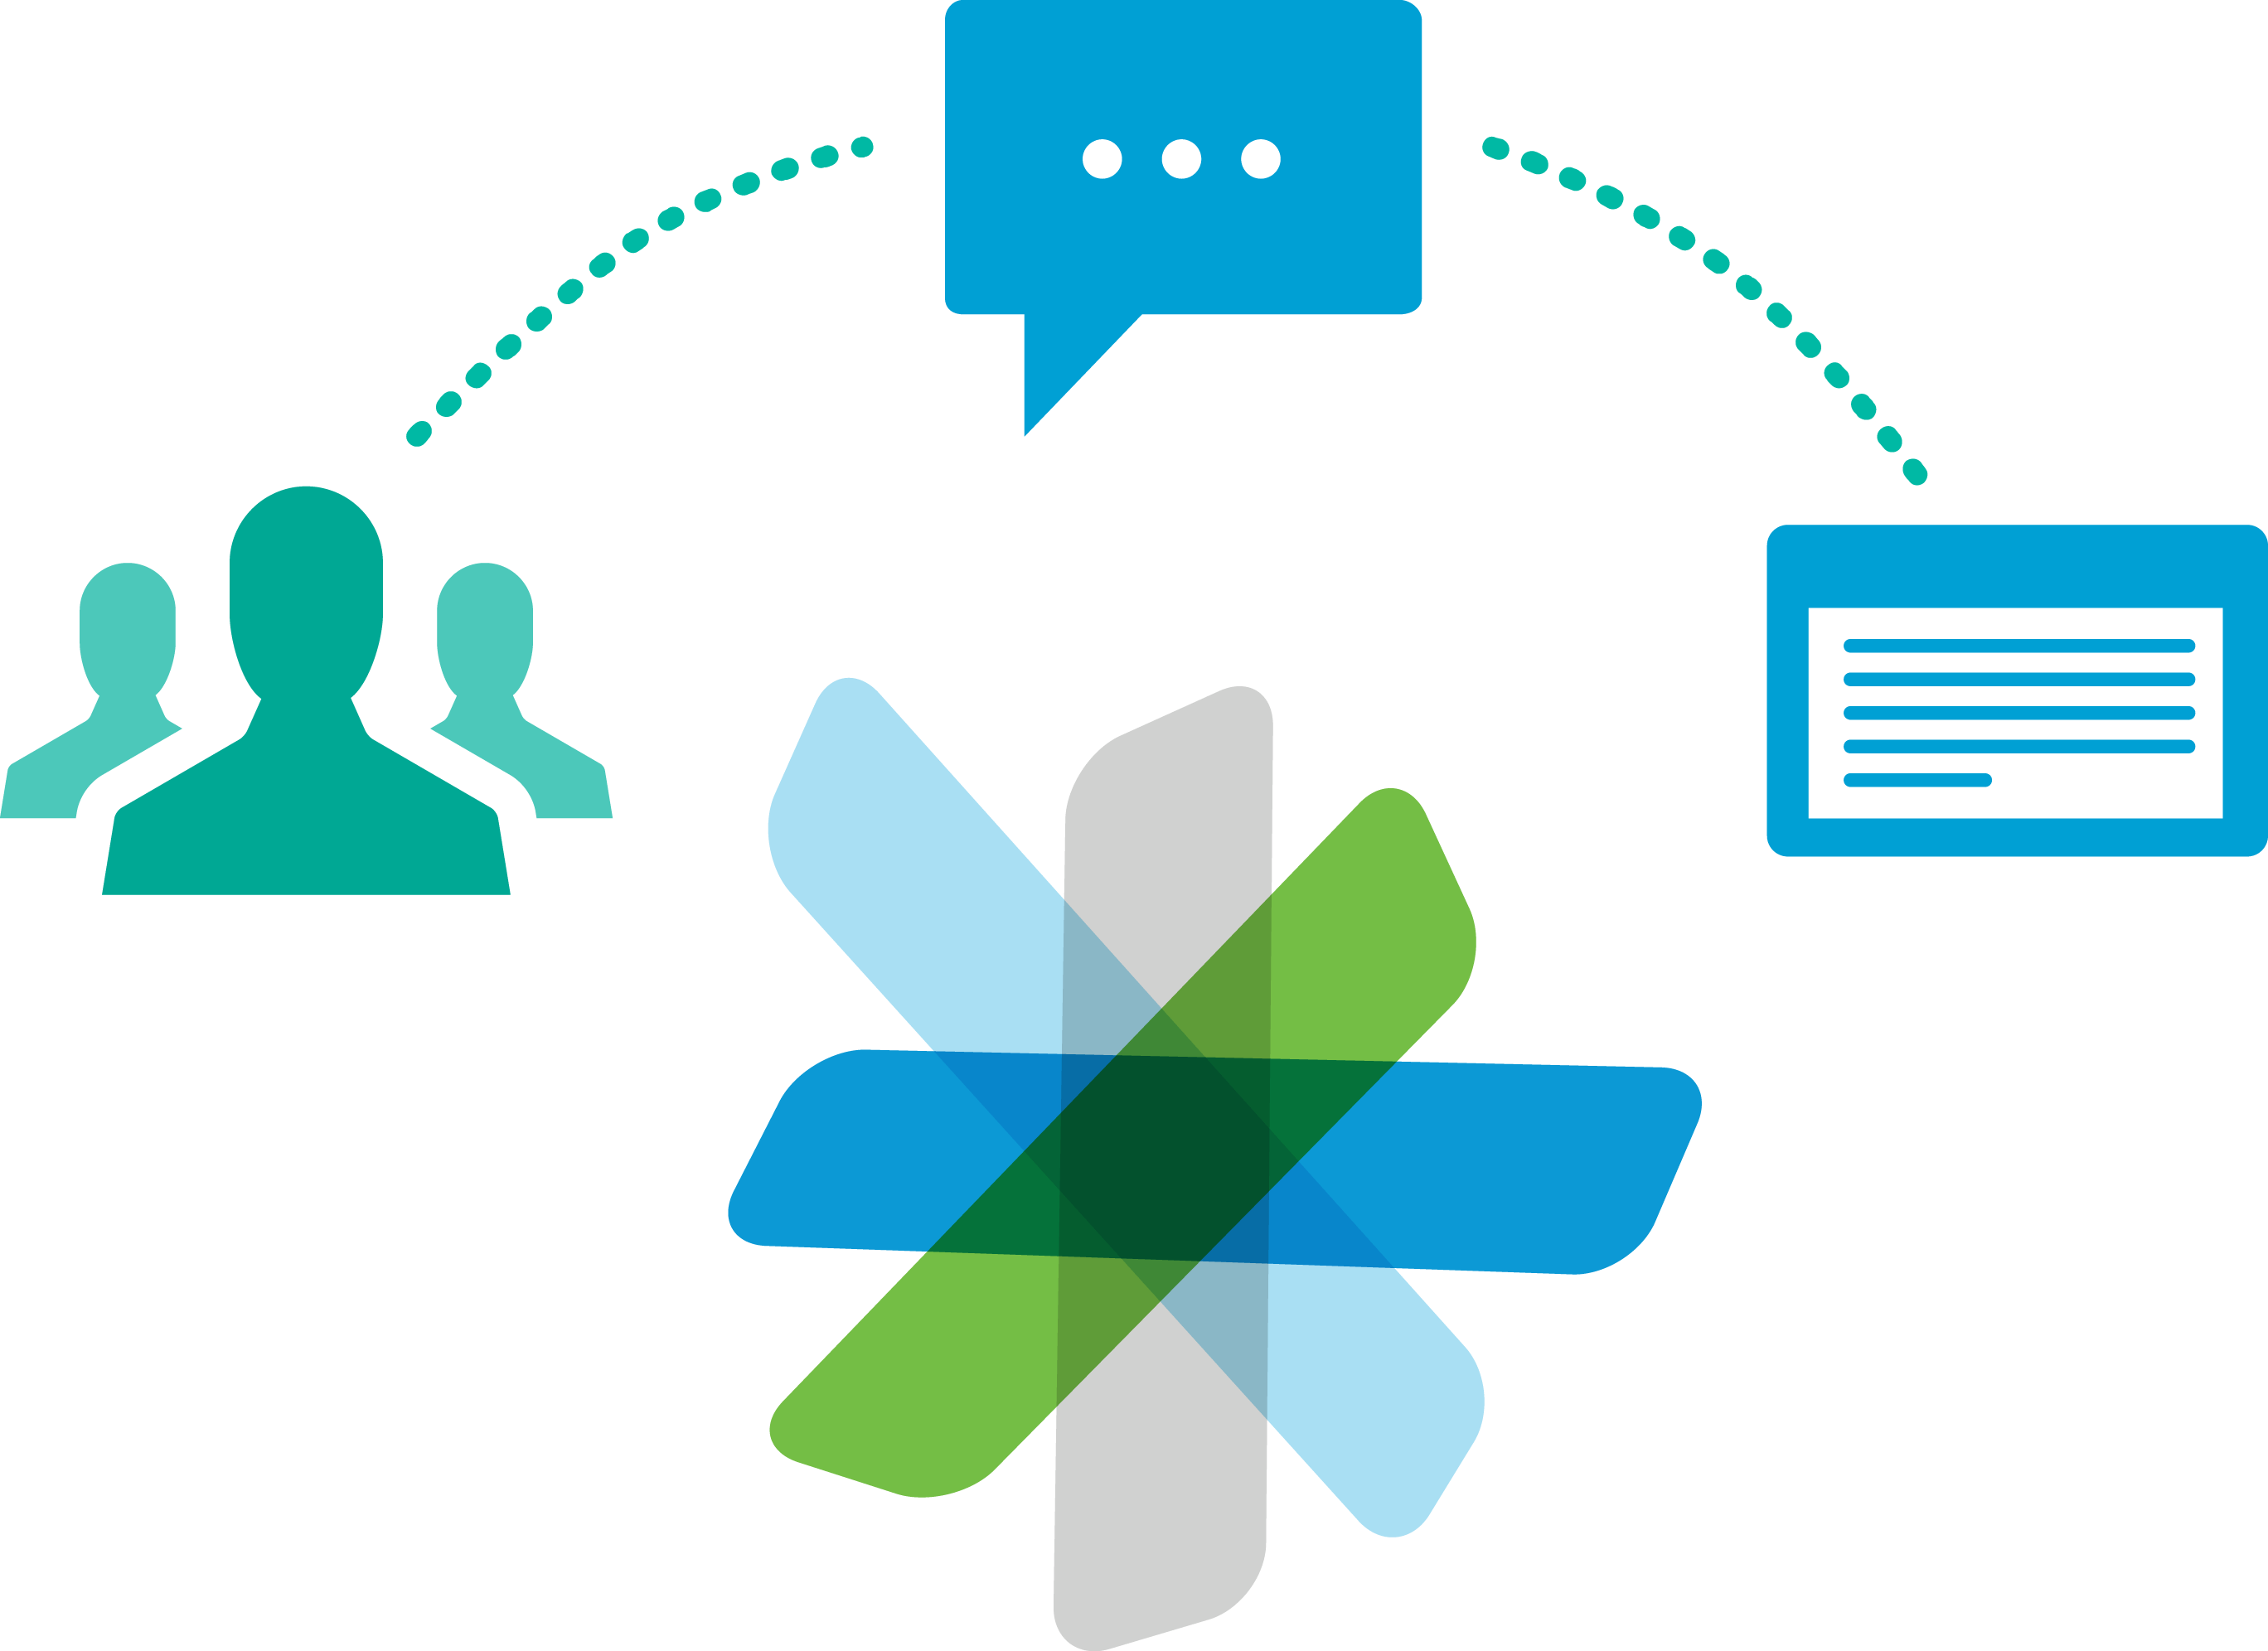 Cisco Spark Logo - 5 TRENDS UNIFIED COMMUNICATIONS AND COLLABORATION IN 2017 - MSInfokom